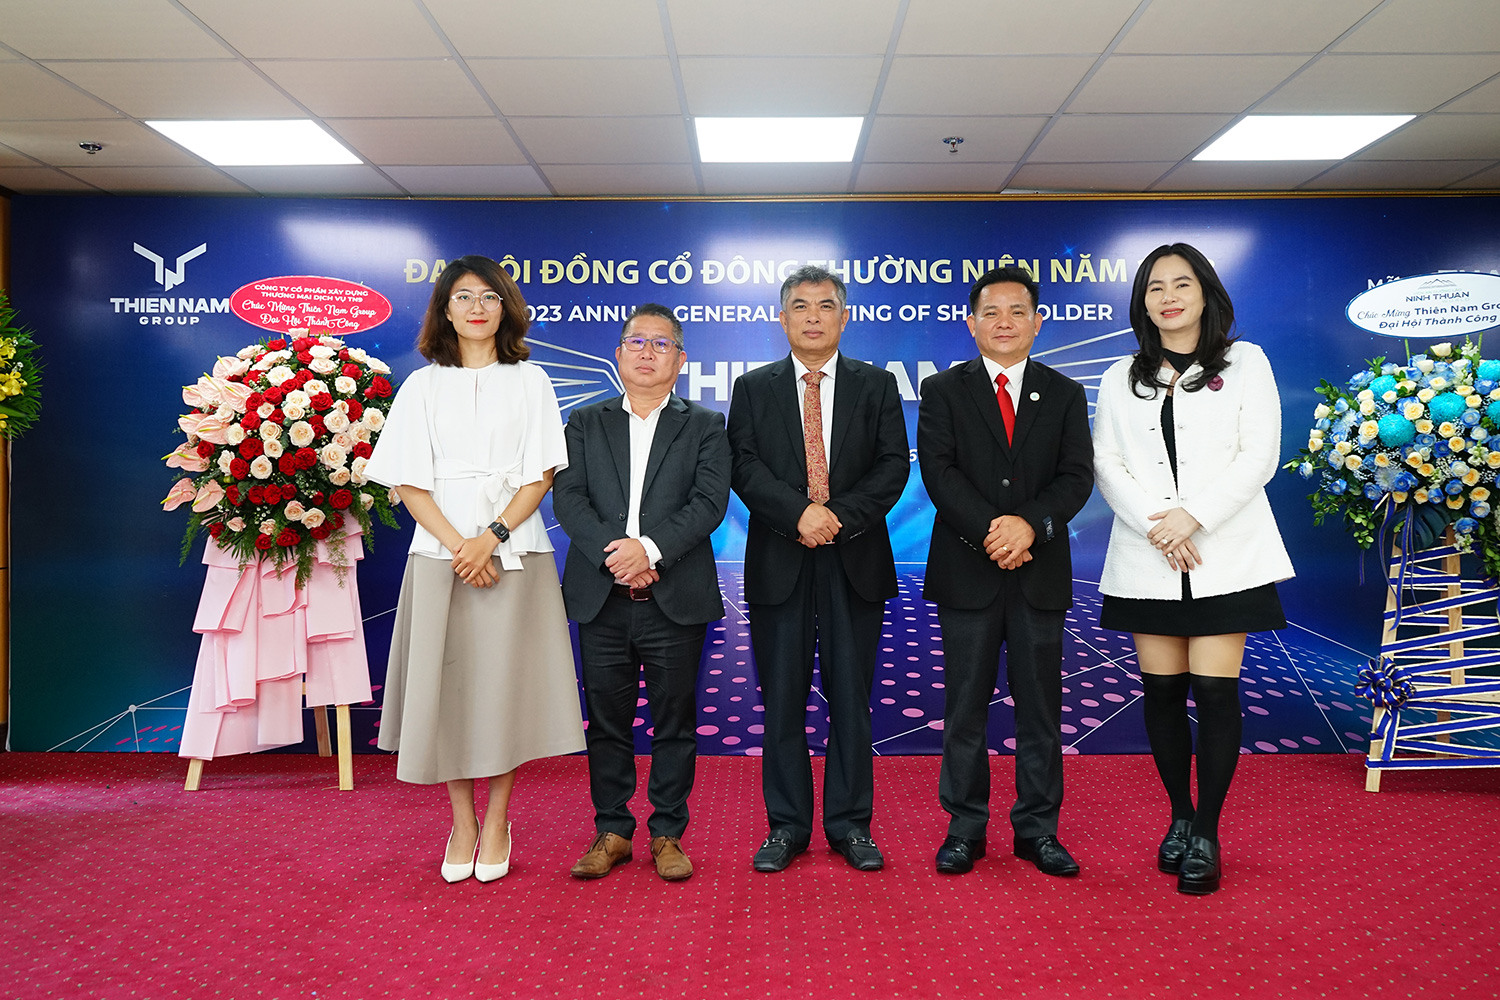 THIEN NAM GROUP SUCCESSFULLY ORGANIZED ANNUAL GENERAL MEETING OF SHAREHOLDERS IN 2023